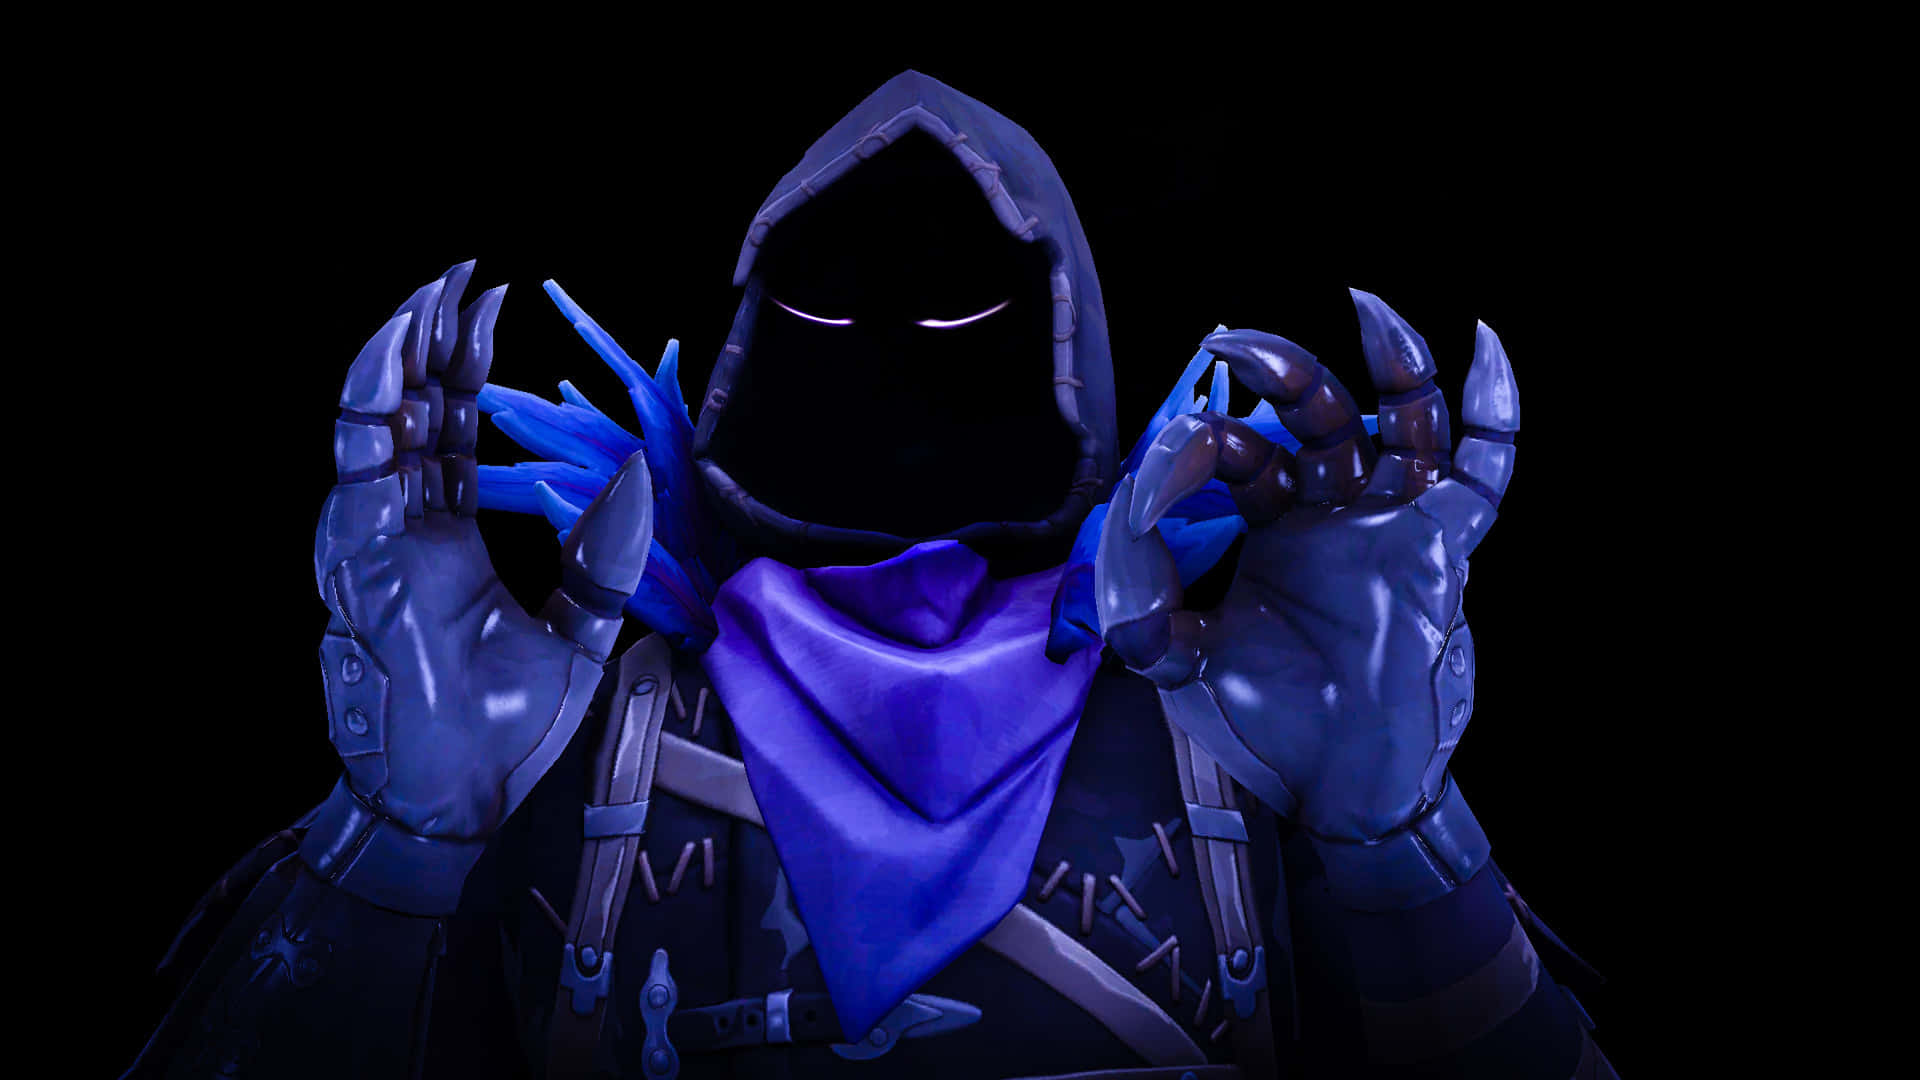 Get Ready For Battle With The Raven Fortnite Skin! Wallpaper